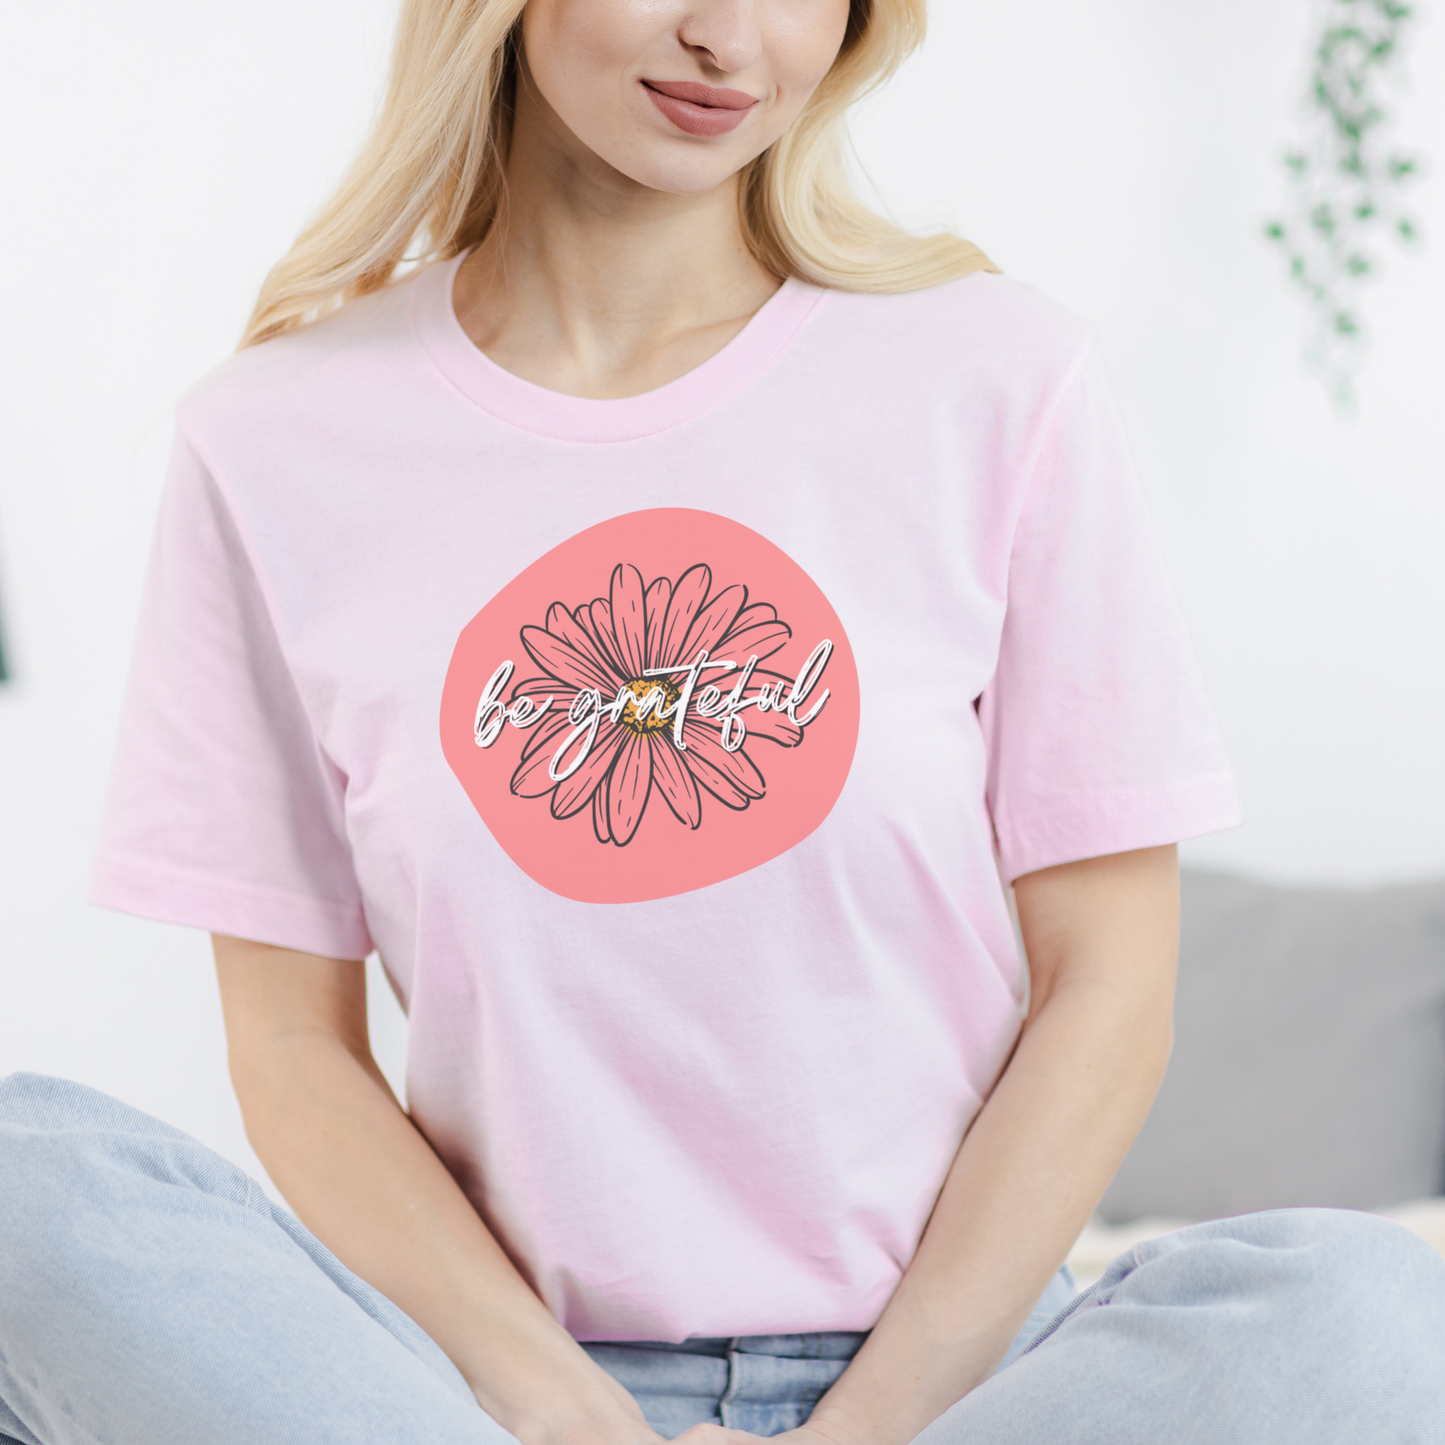 Be Grateful Coral Daisy Floral Positive Message Unisex Jersey Short Sleeve Tee Small-3XL